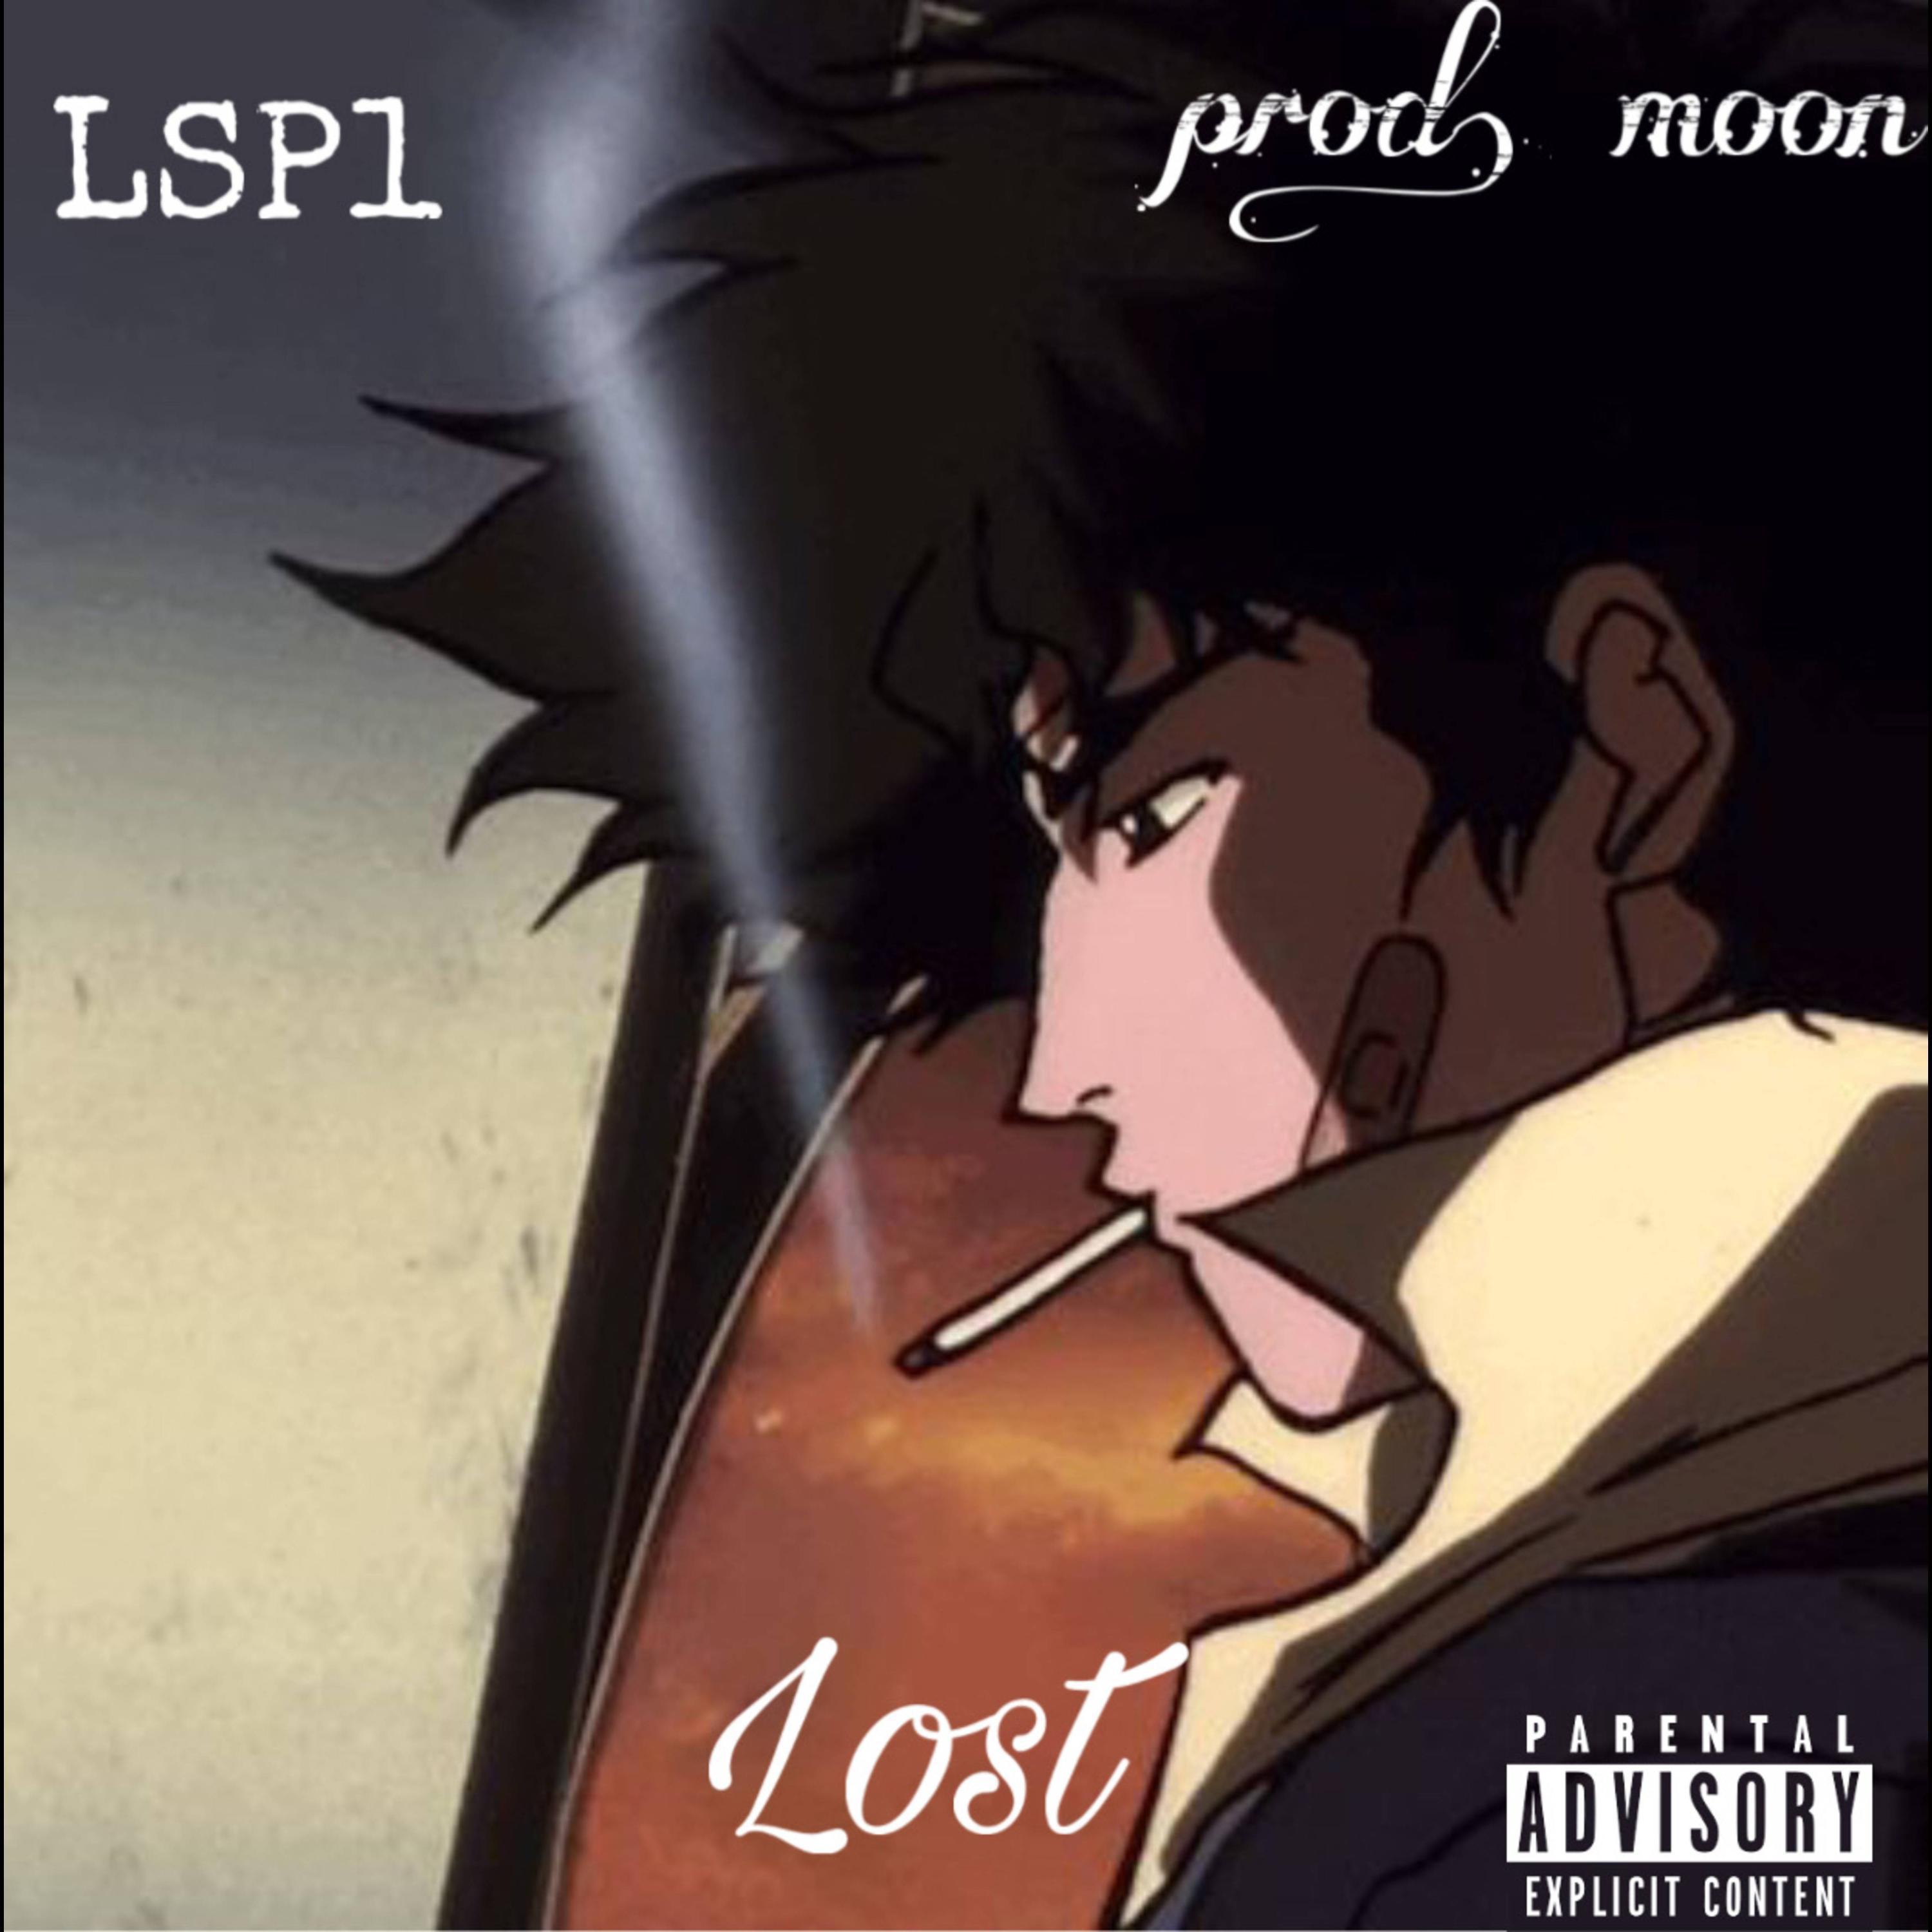 Lsp1 - lost